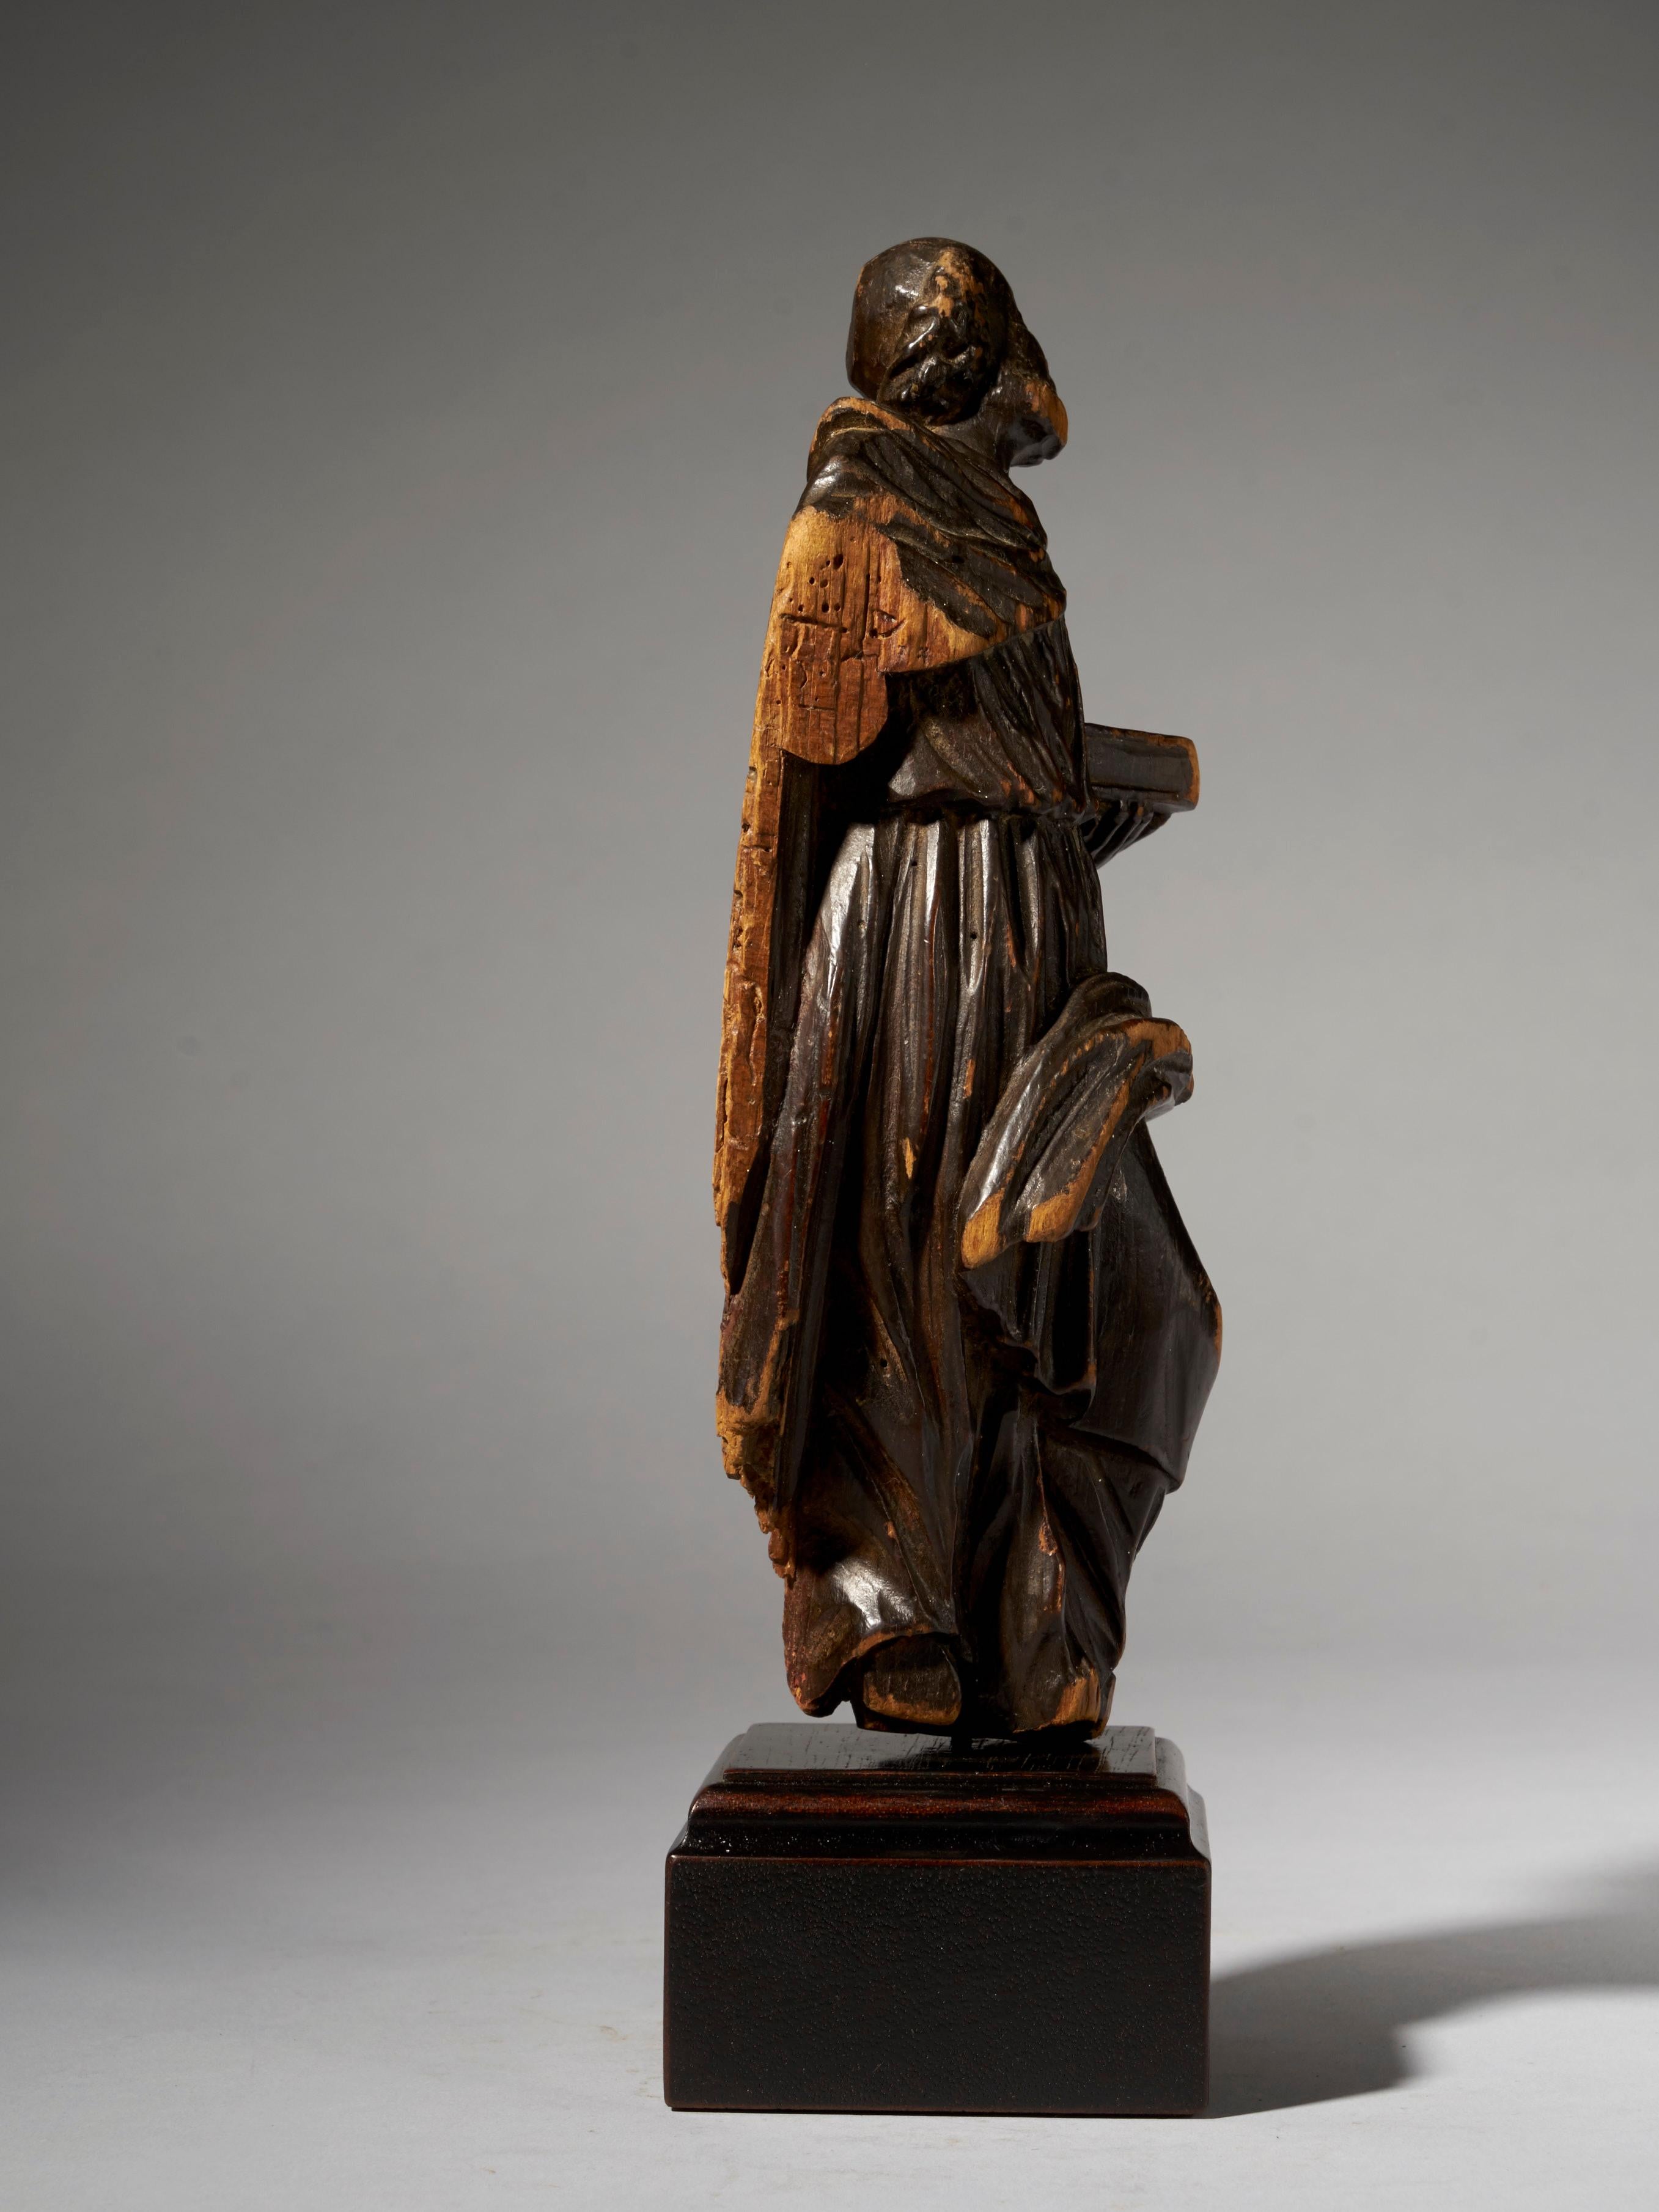 Hand-Carved 19th Century Flemish School, Wooden Statue of Moses Holding the Ten Commandments